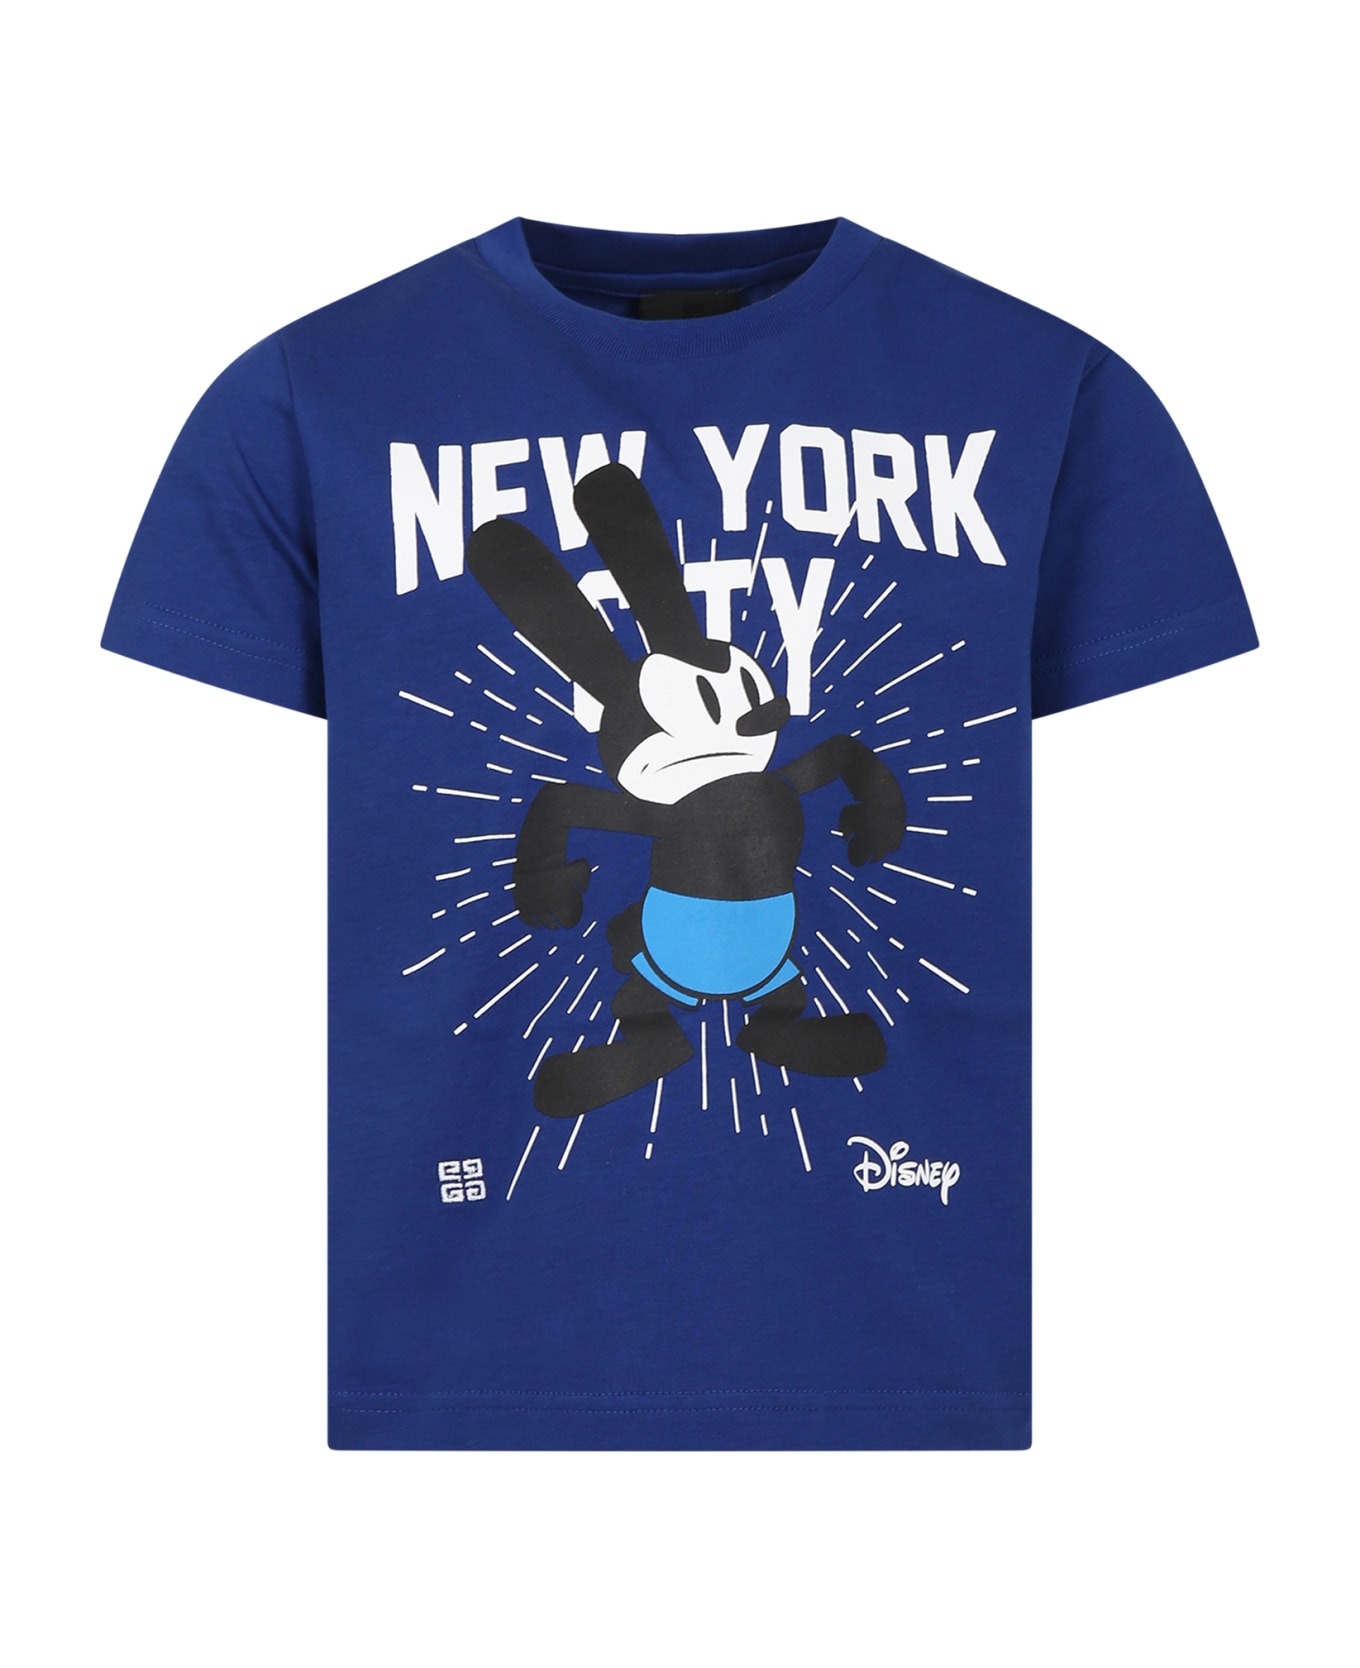 Givenchy Blue T-shirt For Kids With Oswald And Logo - Marine Tシャツ＆ポロシャツ